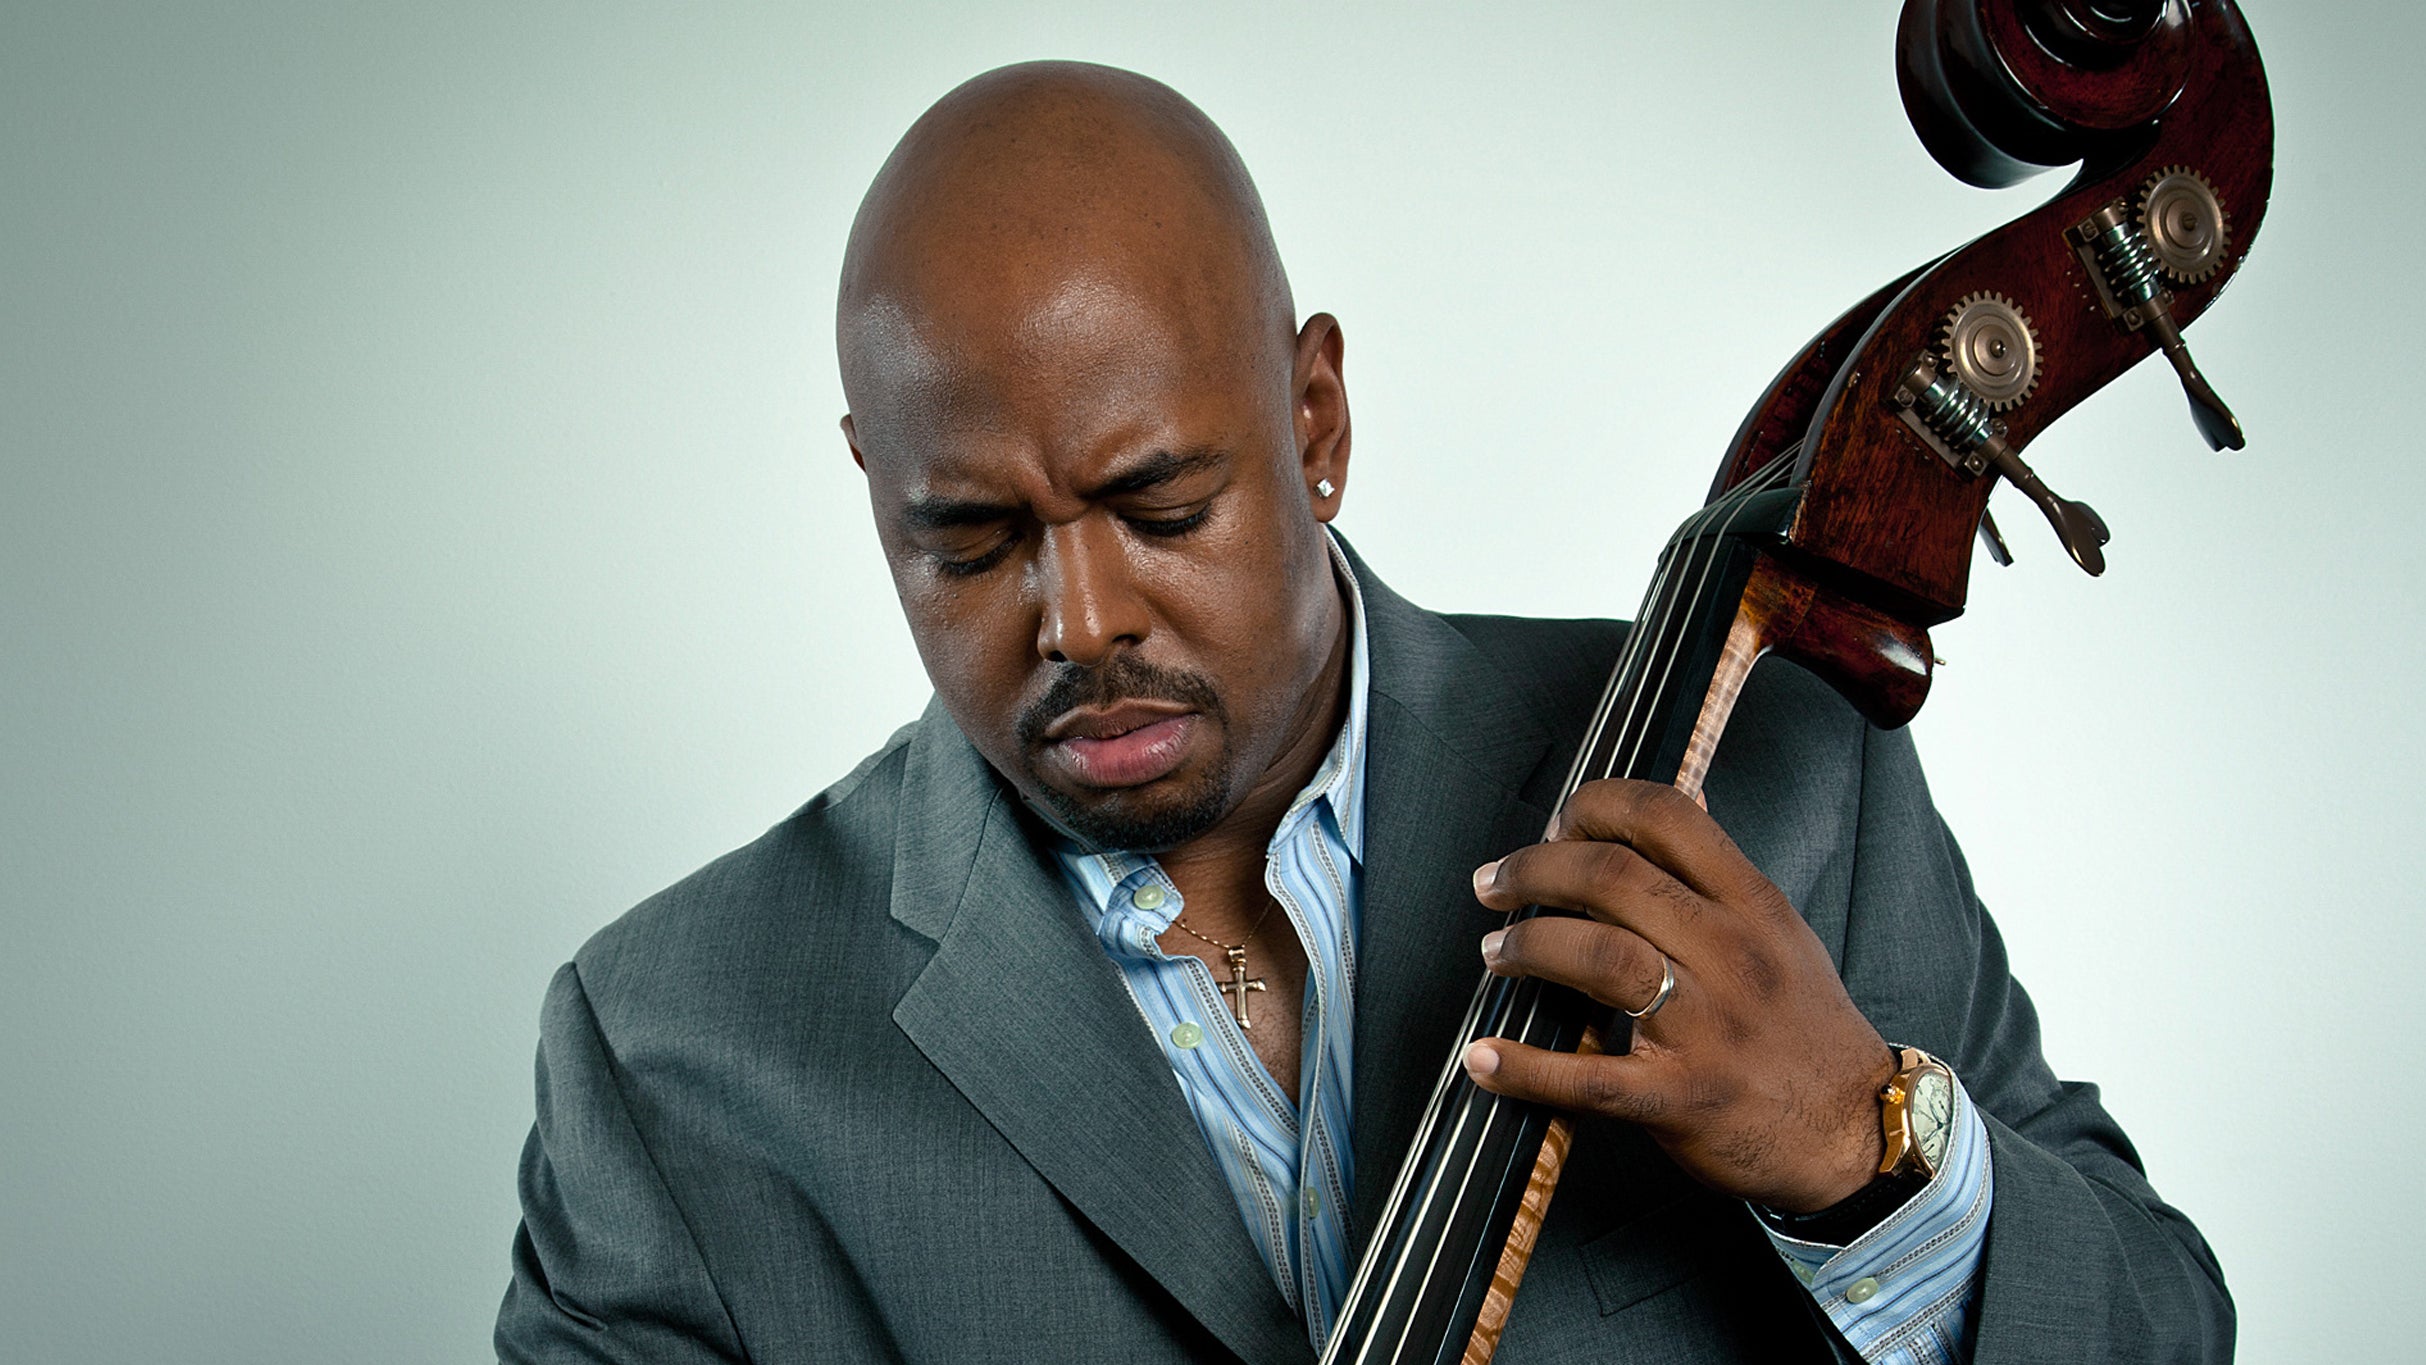 Christian McBride Big Band with special guests presale password for show tickets in Newark, NJ (New Jersey Performing Arts Center)